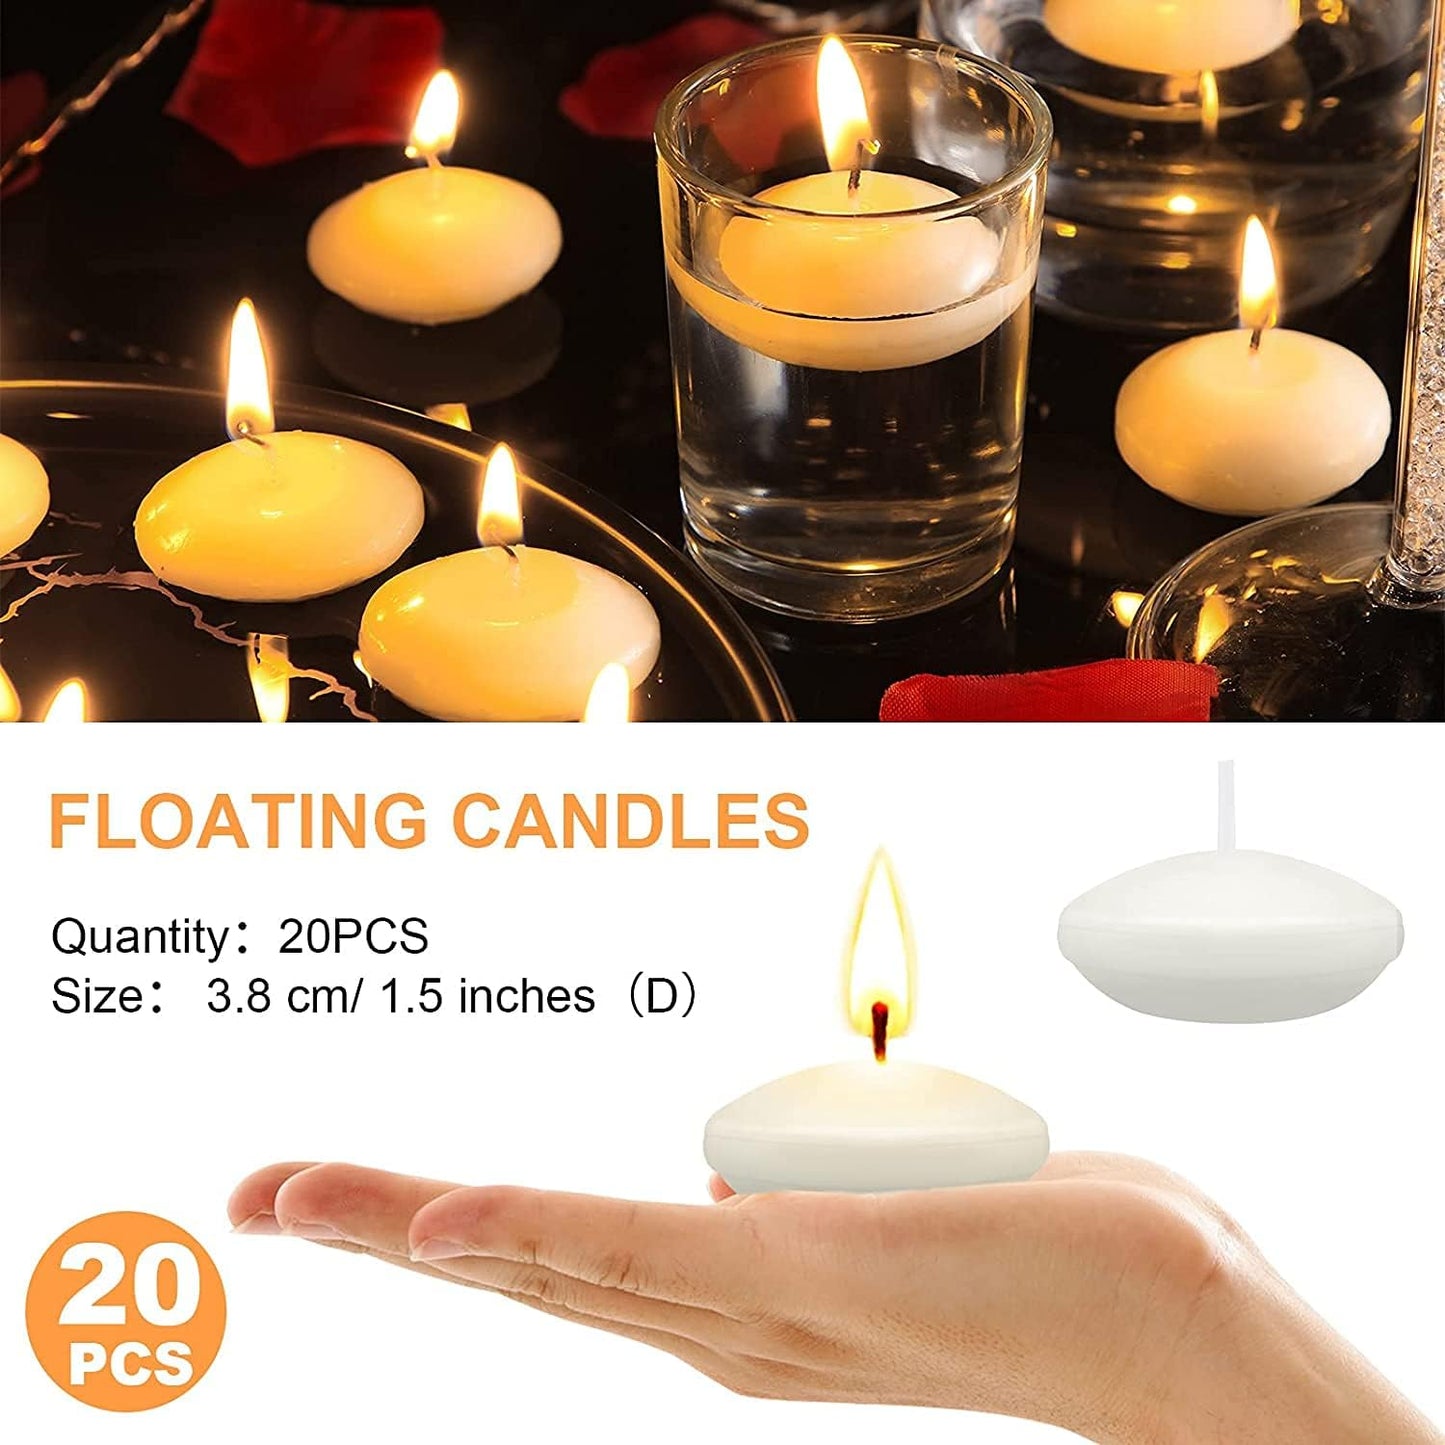 EYUVAA Wax 4 Hrs Burning Floating Candles for Decoration, Unscented Smokeless Dripless Candles for Diwali, Cylinder Vases, Wedding, Party, Pool, Festival (White, Set of 20)